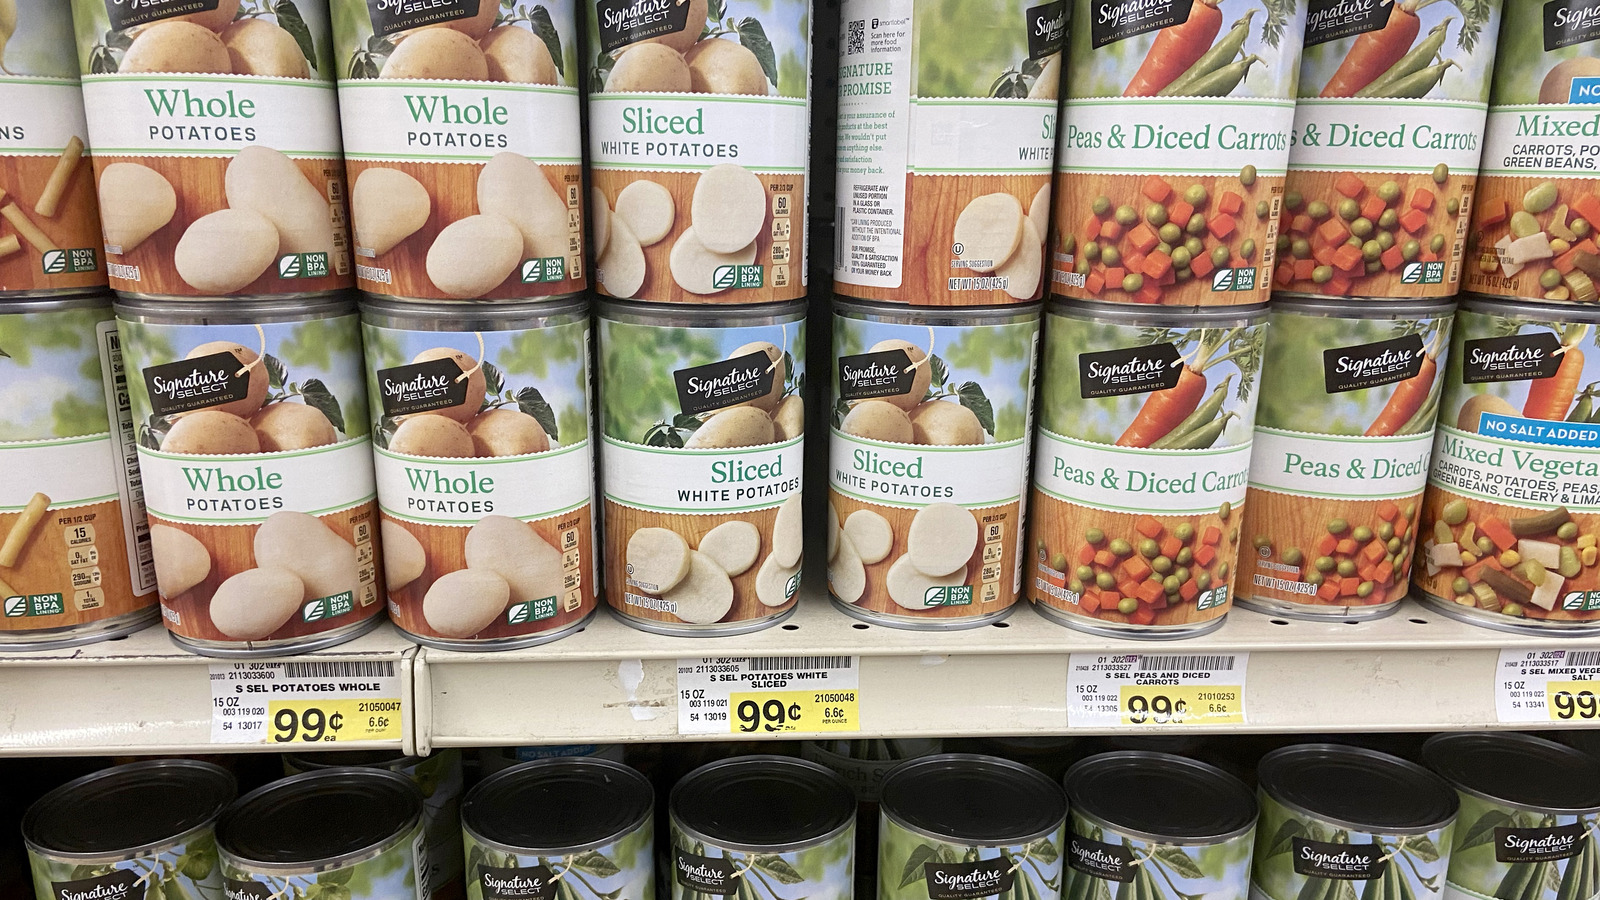 ) Low-priced canned goods